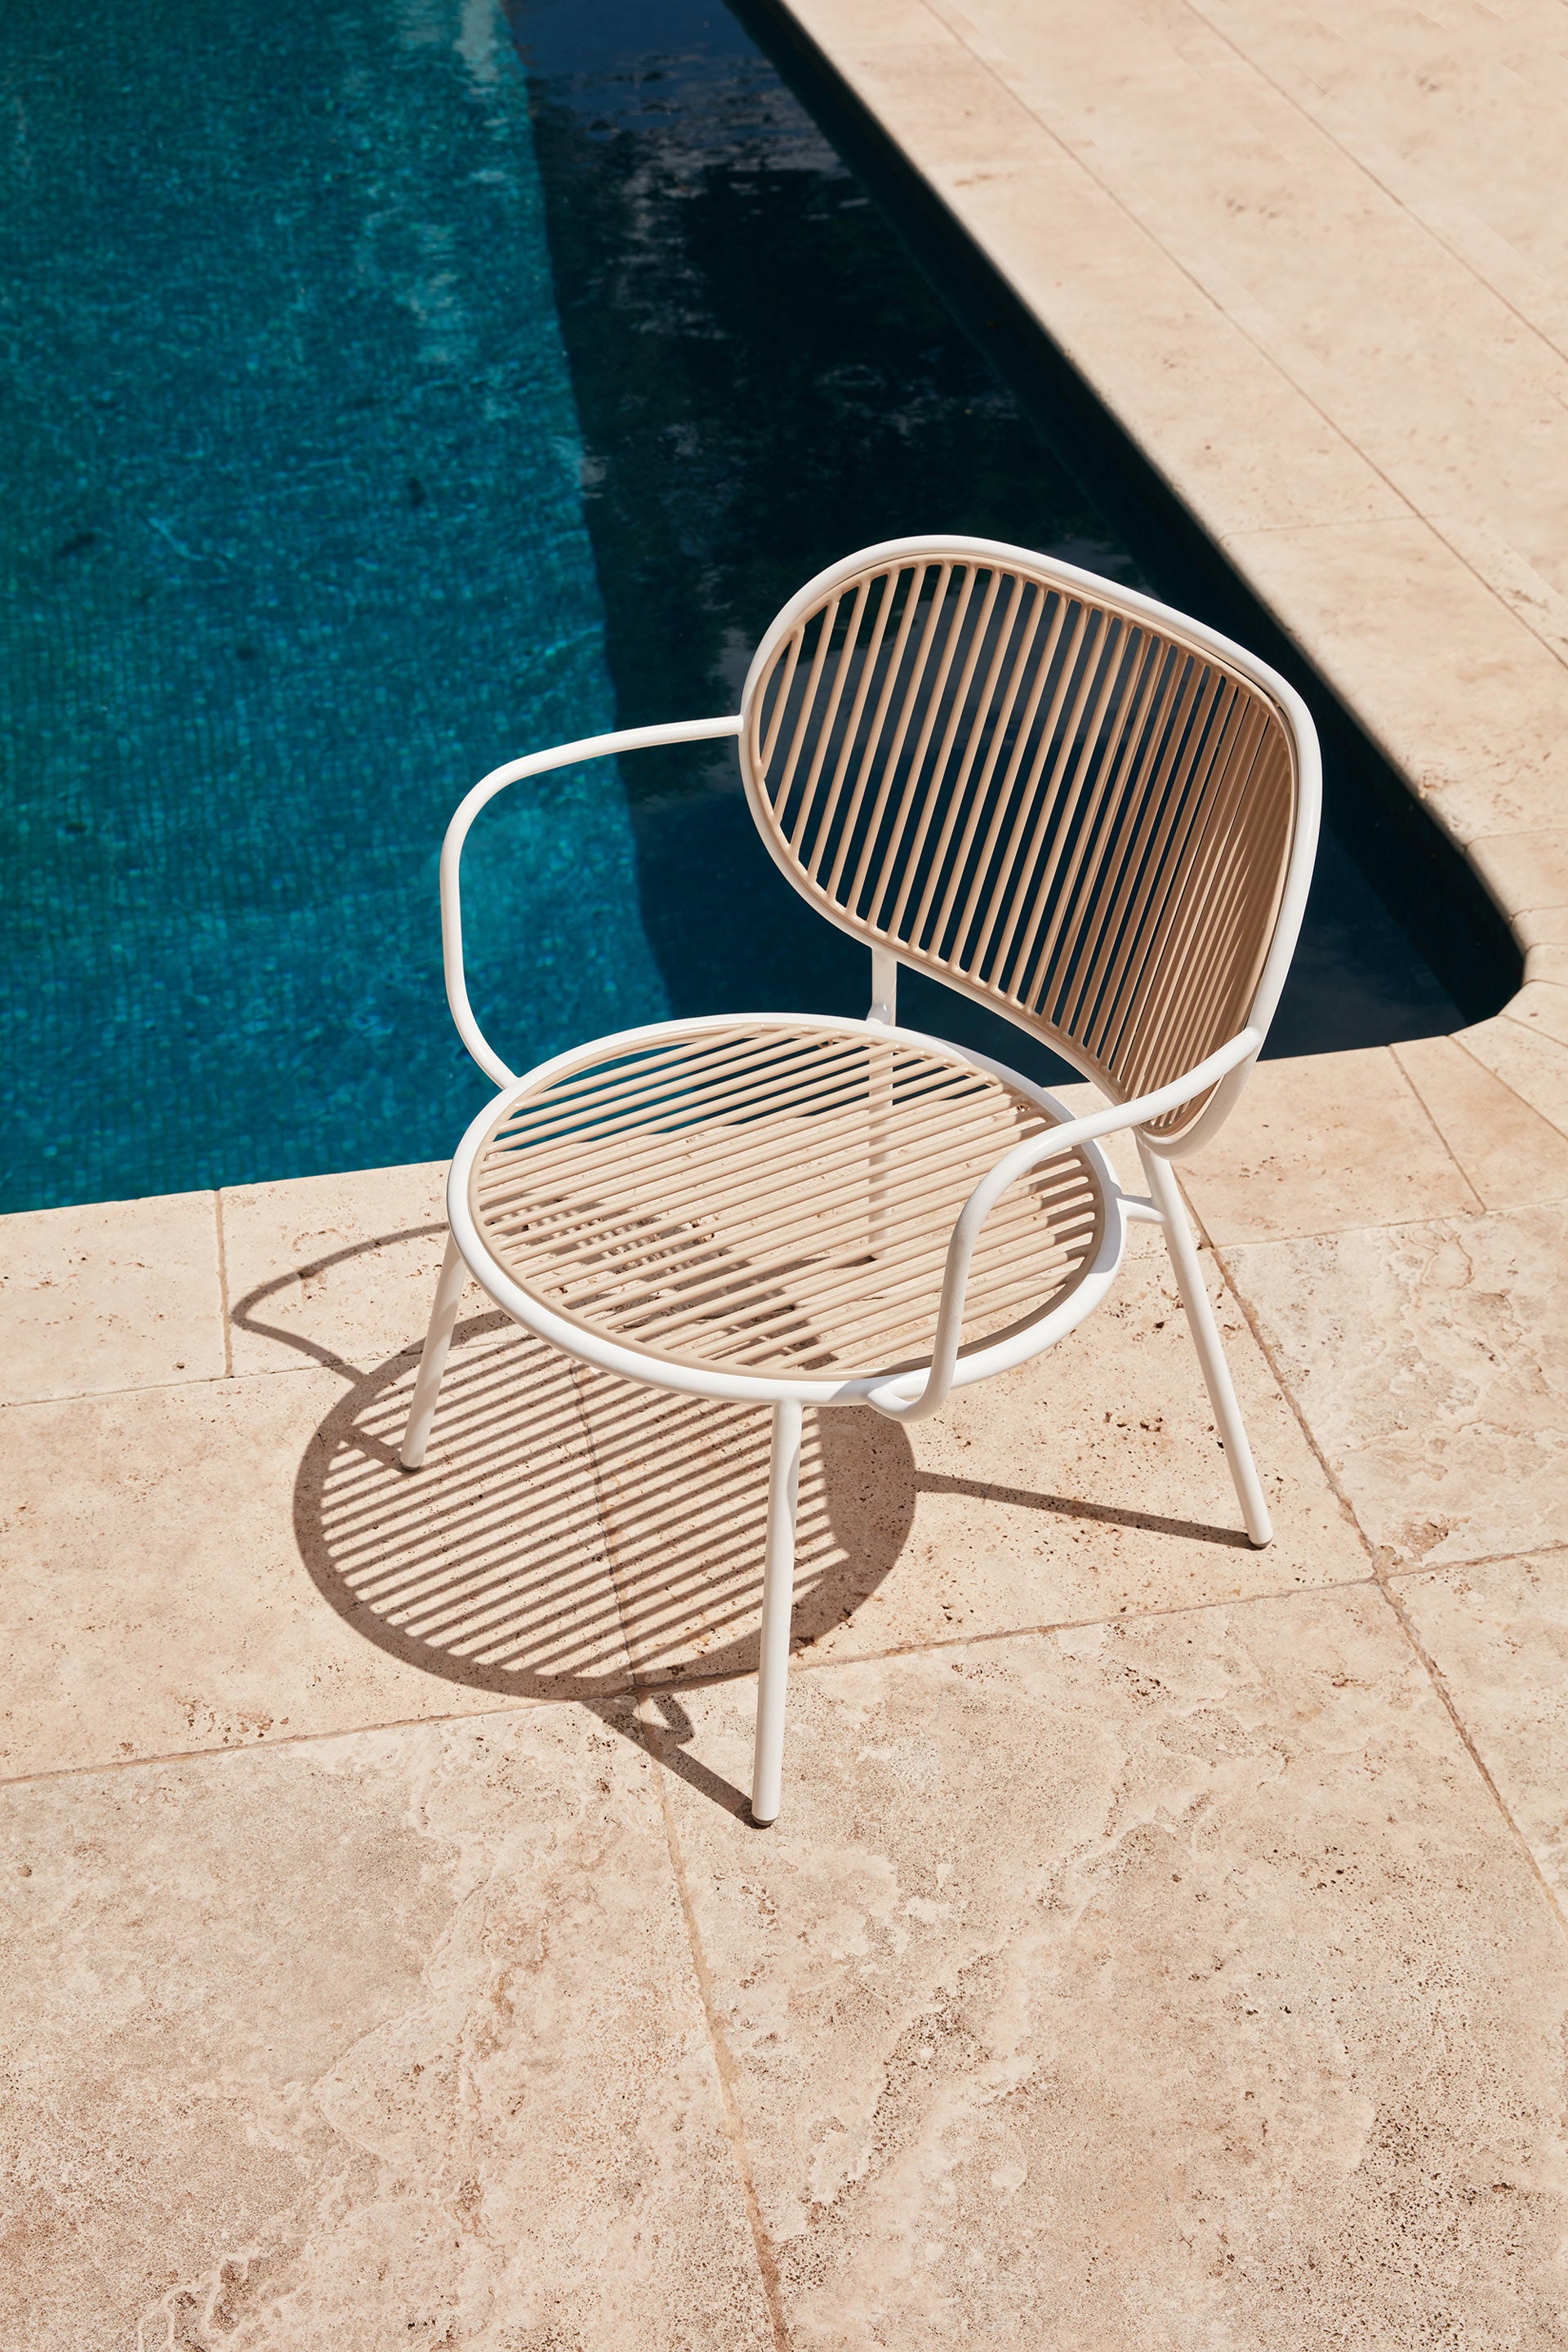 Piper Lounge Chair | Stainless Steel Outdoor Furniture | Gibson Karlo | DesignByThem